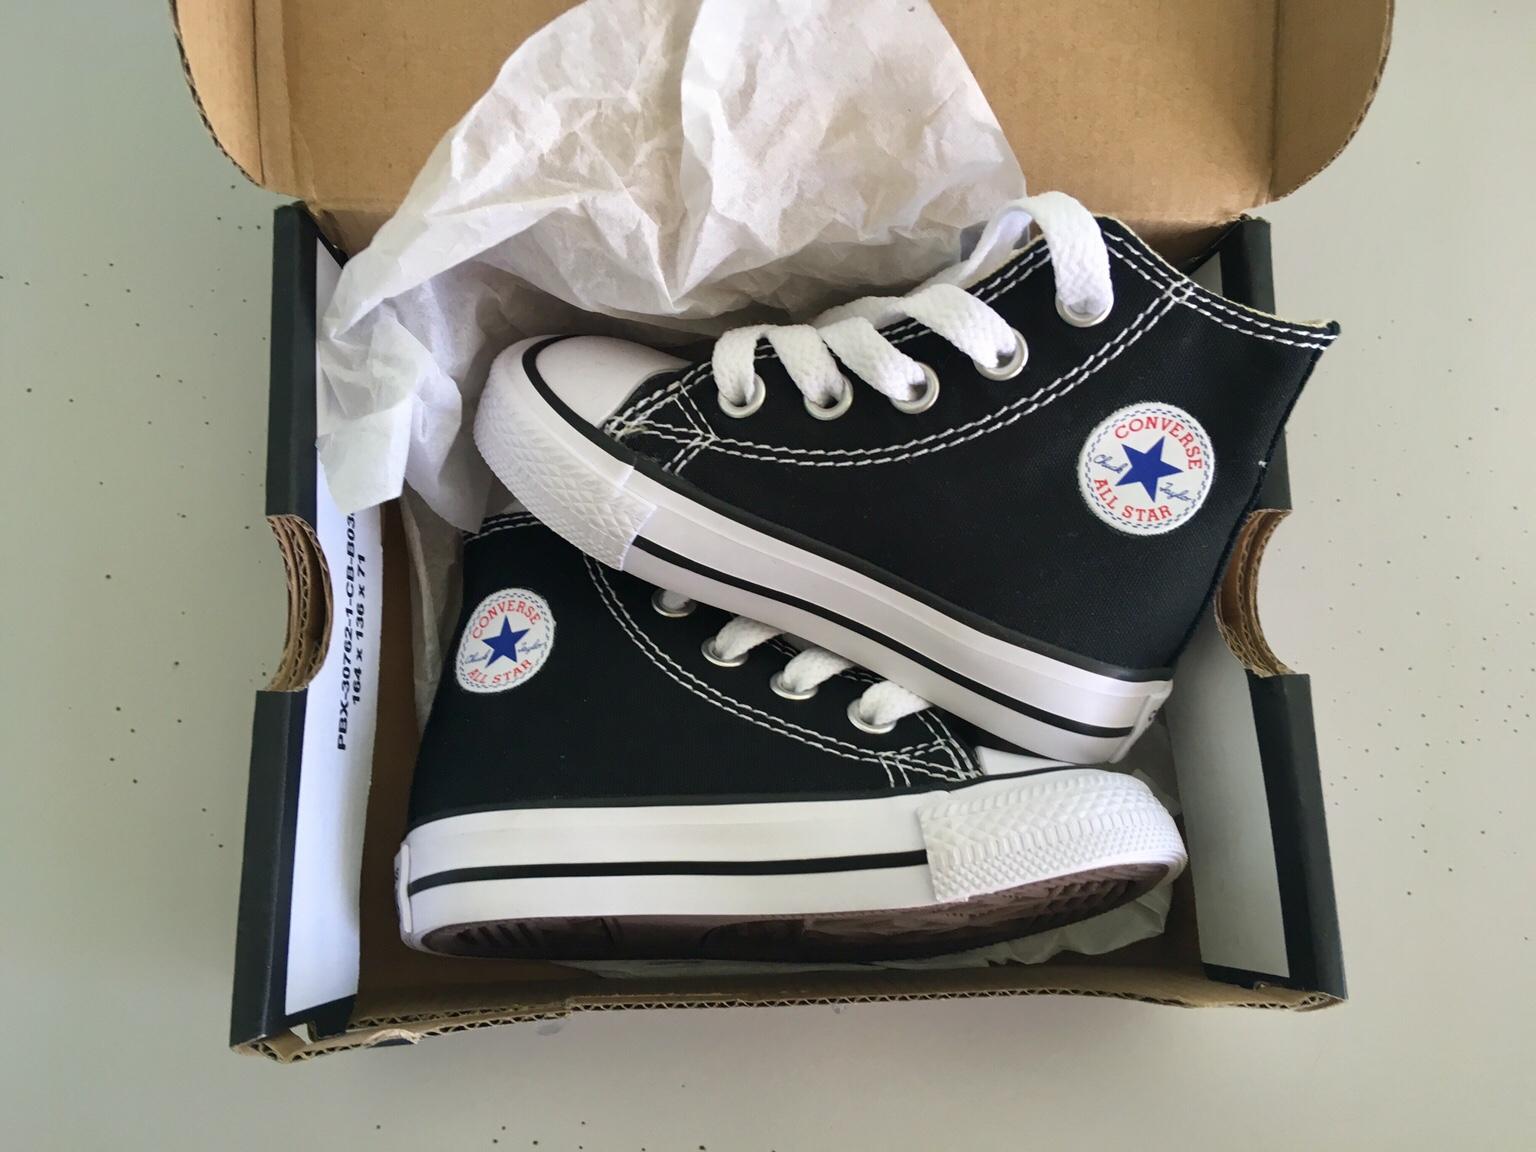 Baby Converse size 4 high tops in NW9 London for £20.00 for sale | Shpock